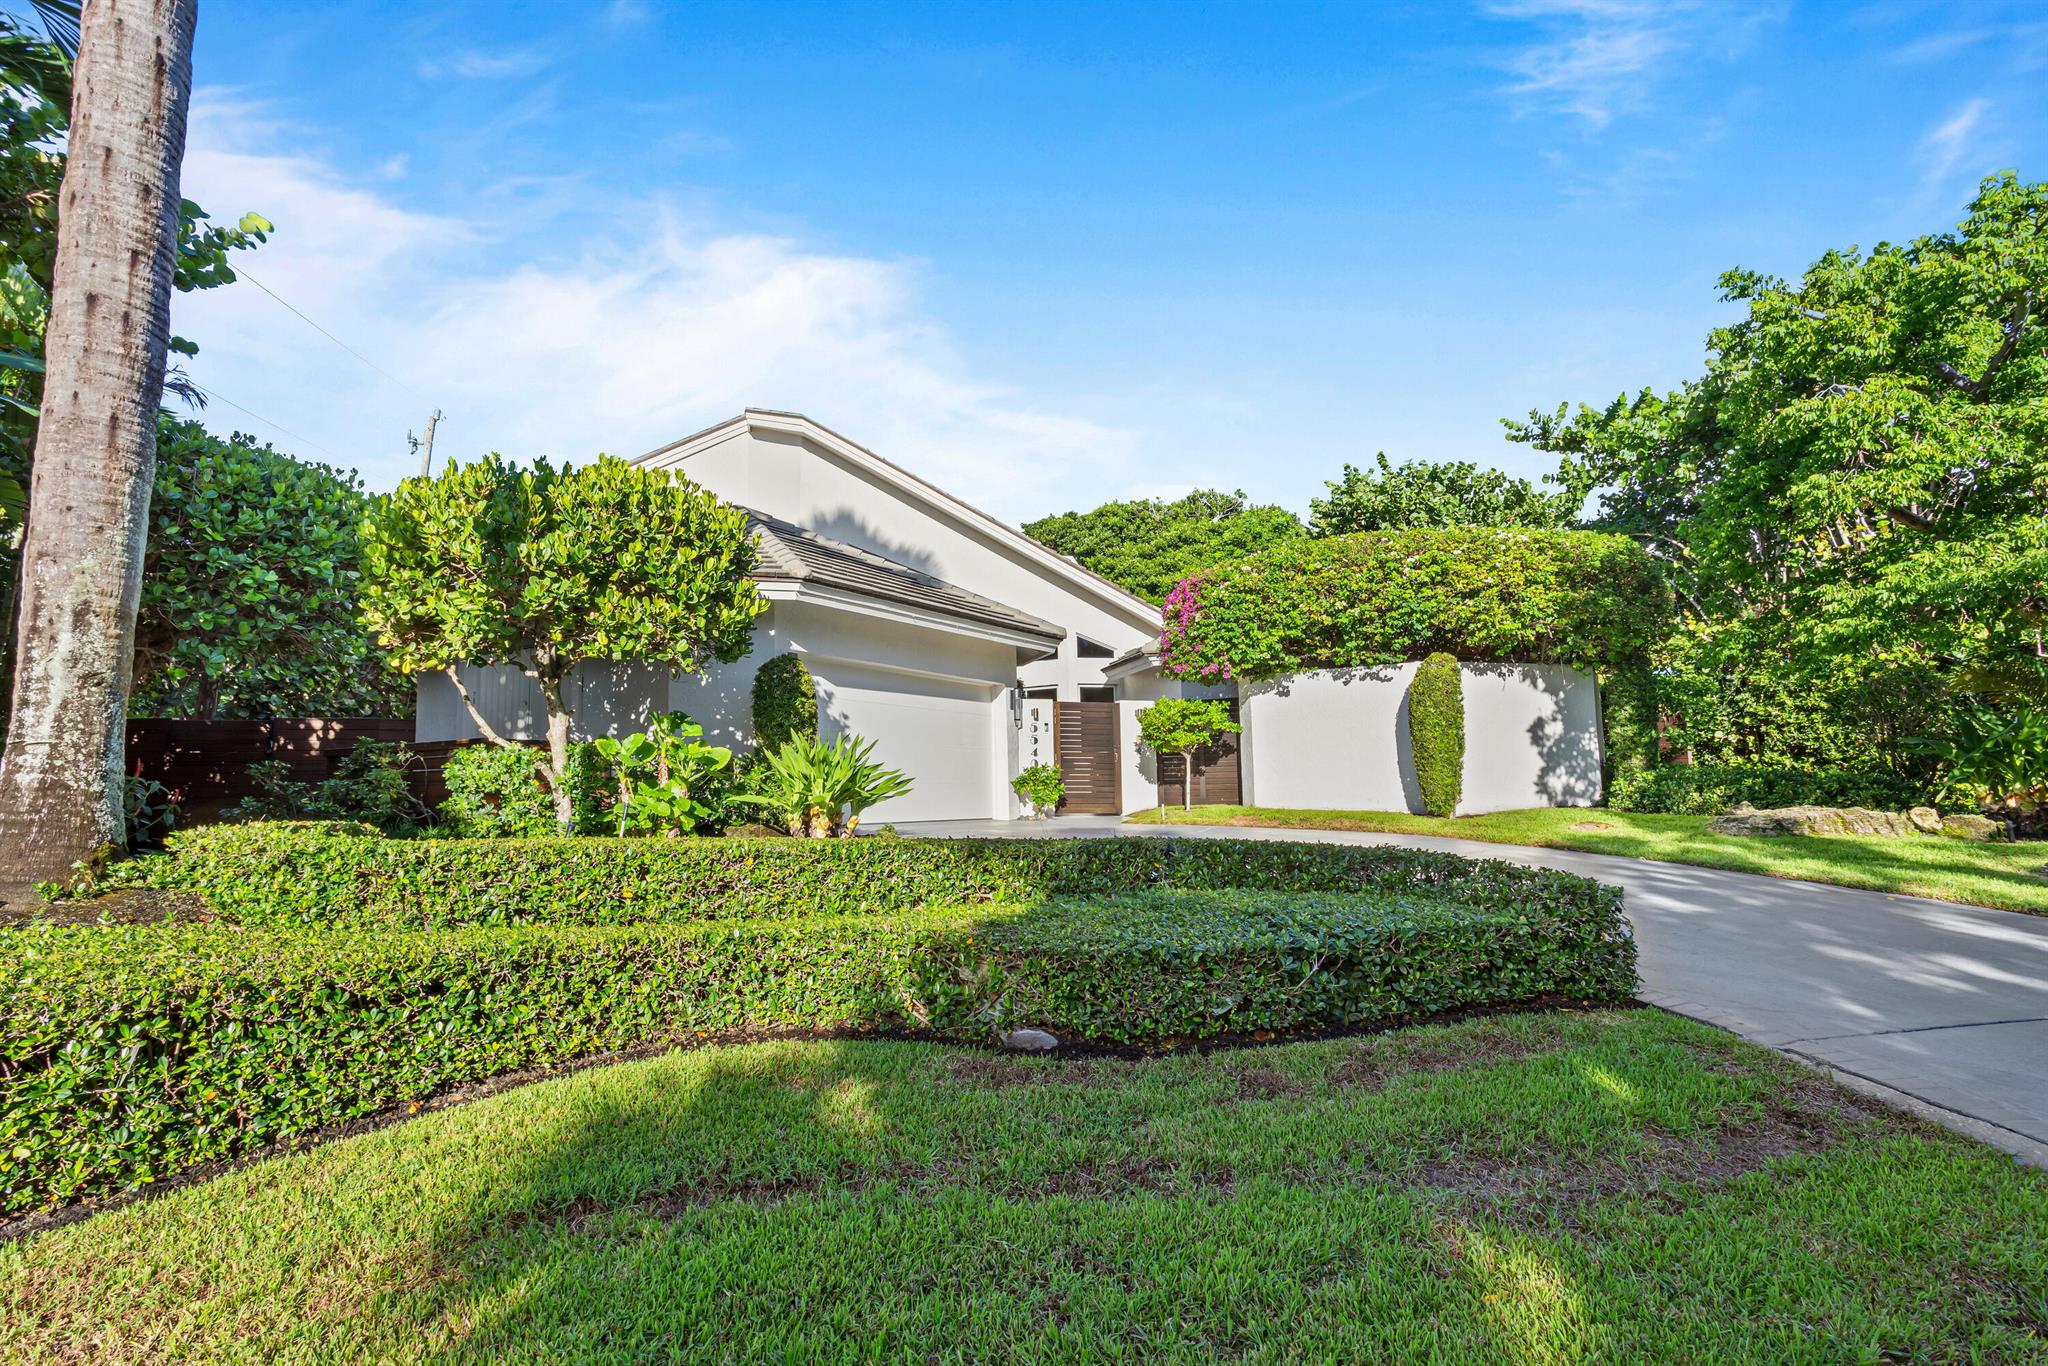 Lushly landscaped beach-area four-bedroom estate in prestigious Ocean Ridge is beautifully detailed with a modern vibe, a touch of Zen, and a sense of drama. Attractive details include dramatic soaring vaulted ceilings, polished Saturnia flooring, and a fireplace with a stone mantel. The lush tropical landscaping is enhanced by many new features, and this neighborhood has easy beach access.